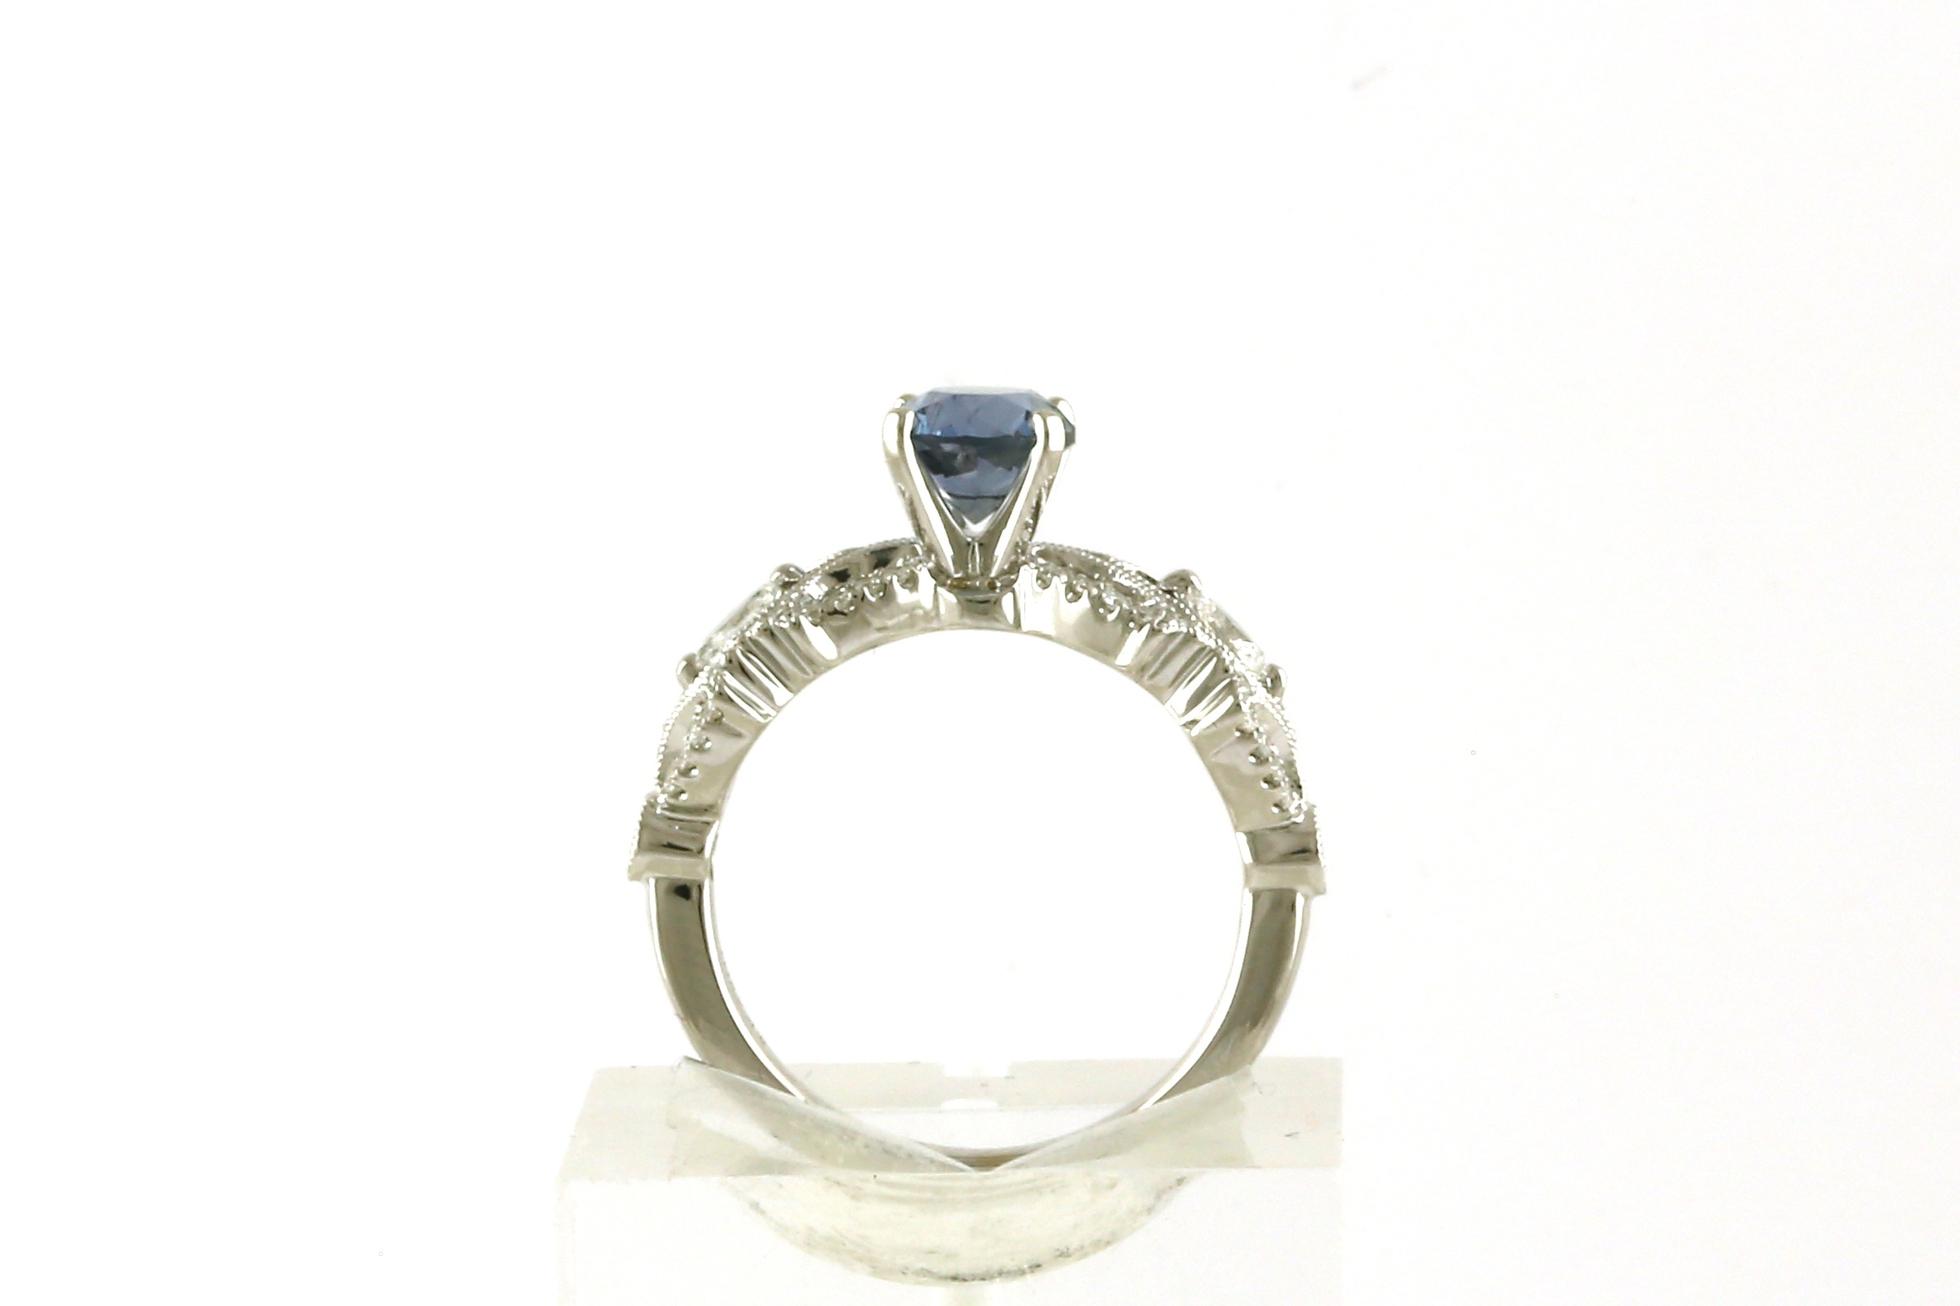 4-Prong with Marquise Filigree Shank Montana Sapphire and Diamond Ring in White Gold (1.61cts TWT) Side View